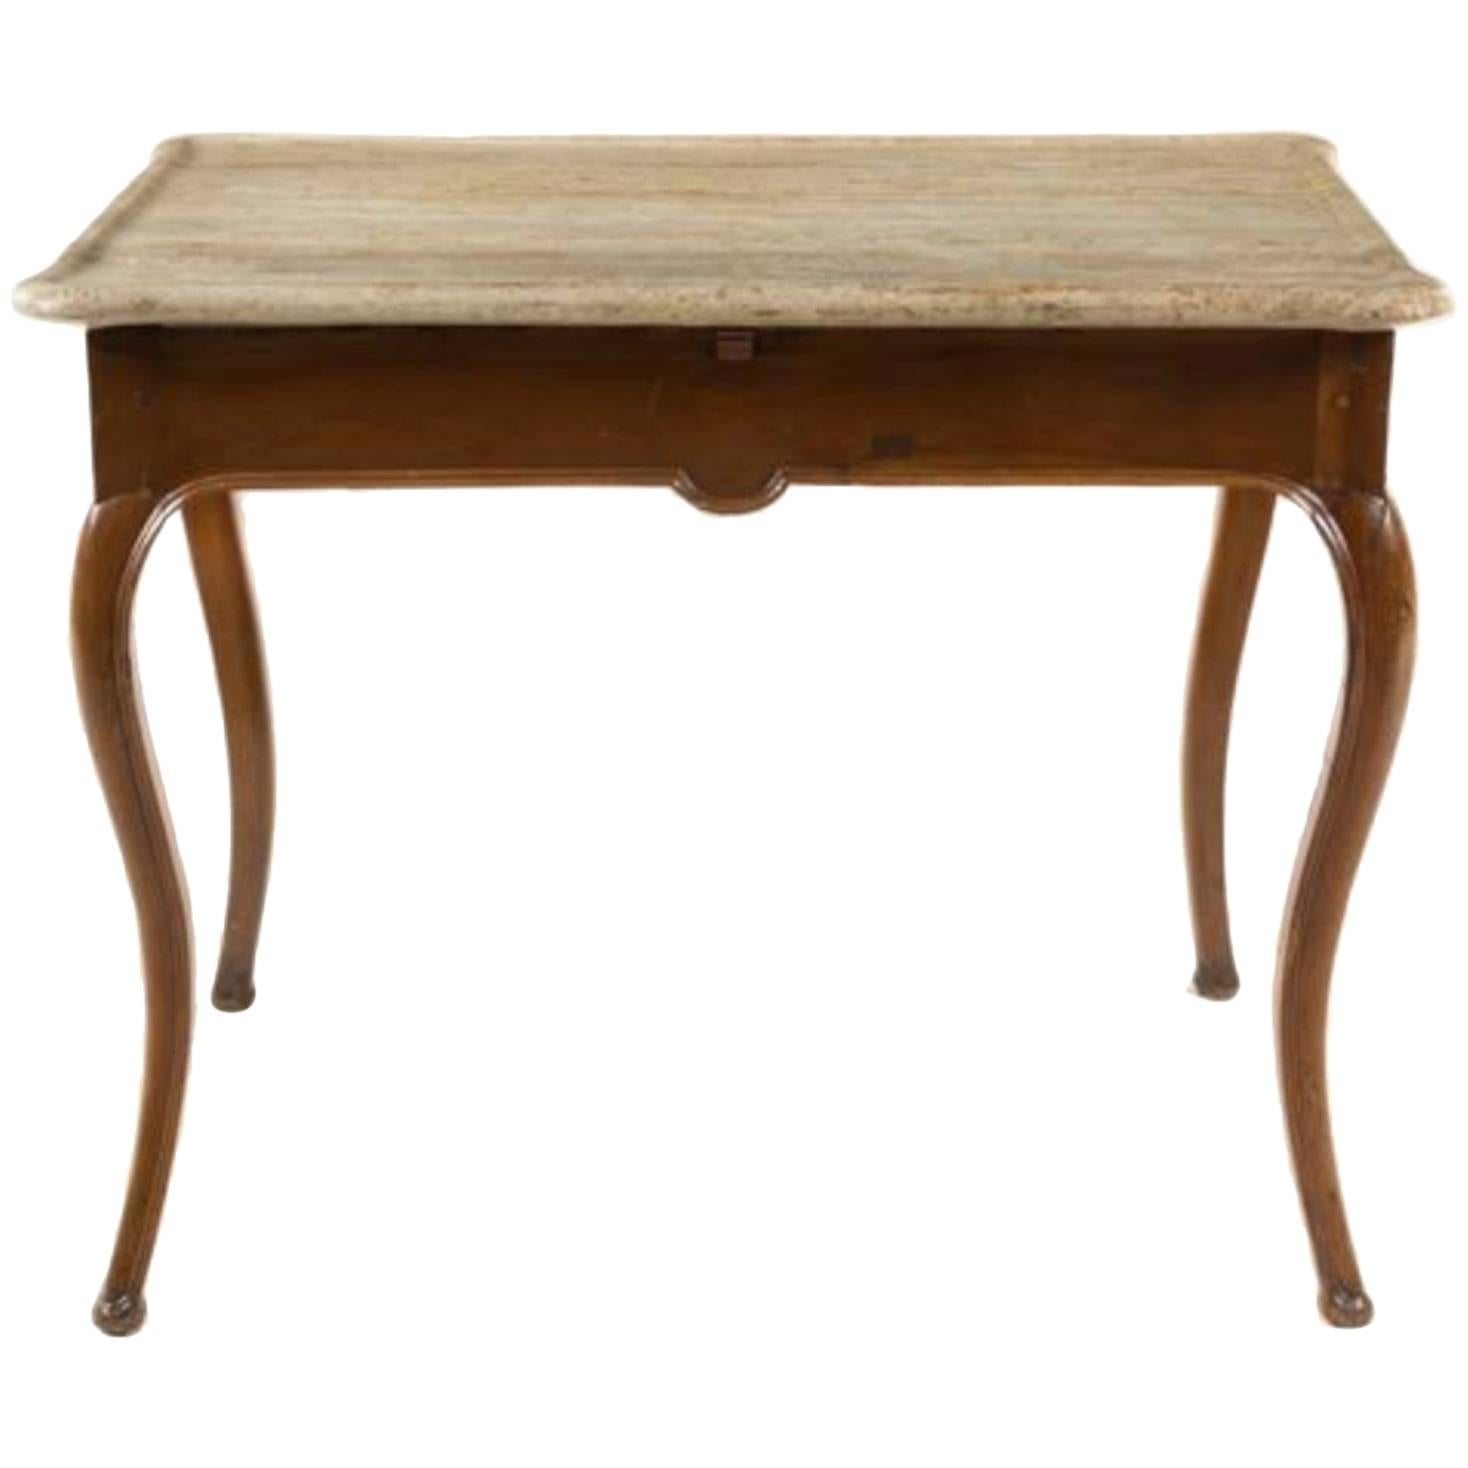 Louis XV Provincial Style Walnut Tea Table with Stone Top, 19th Century